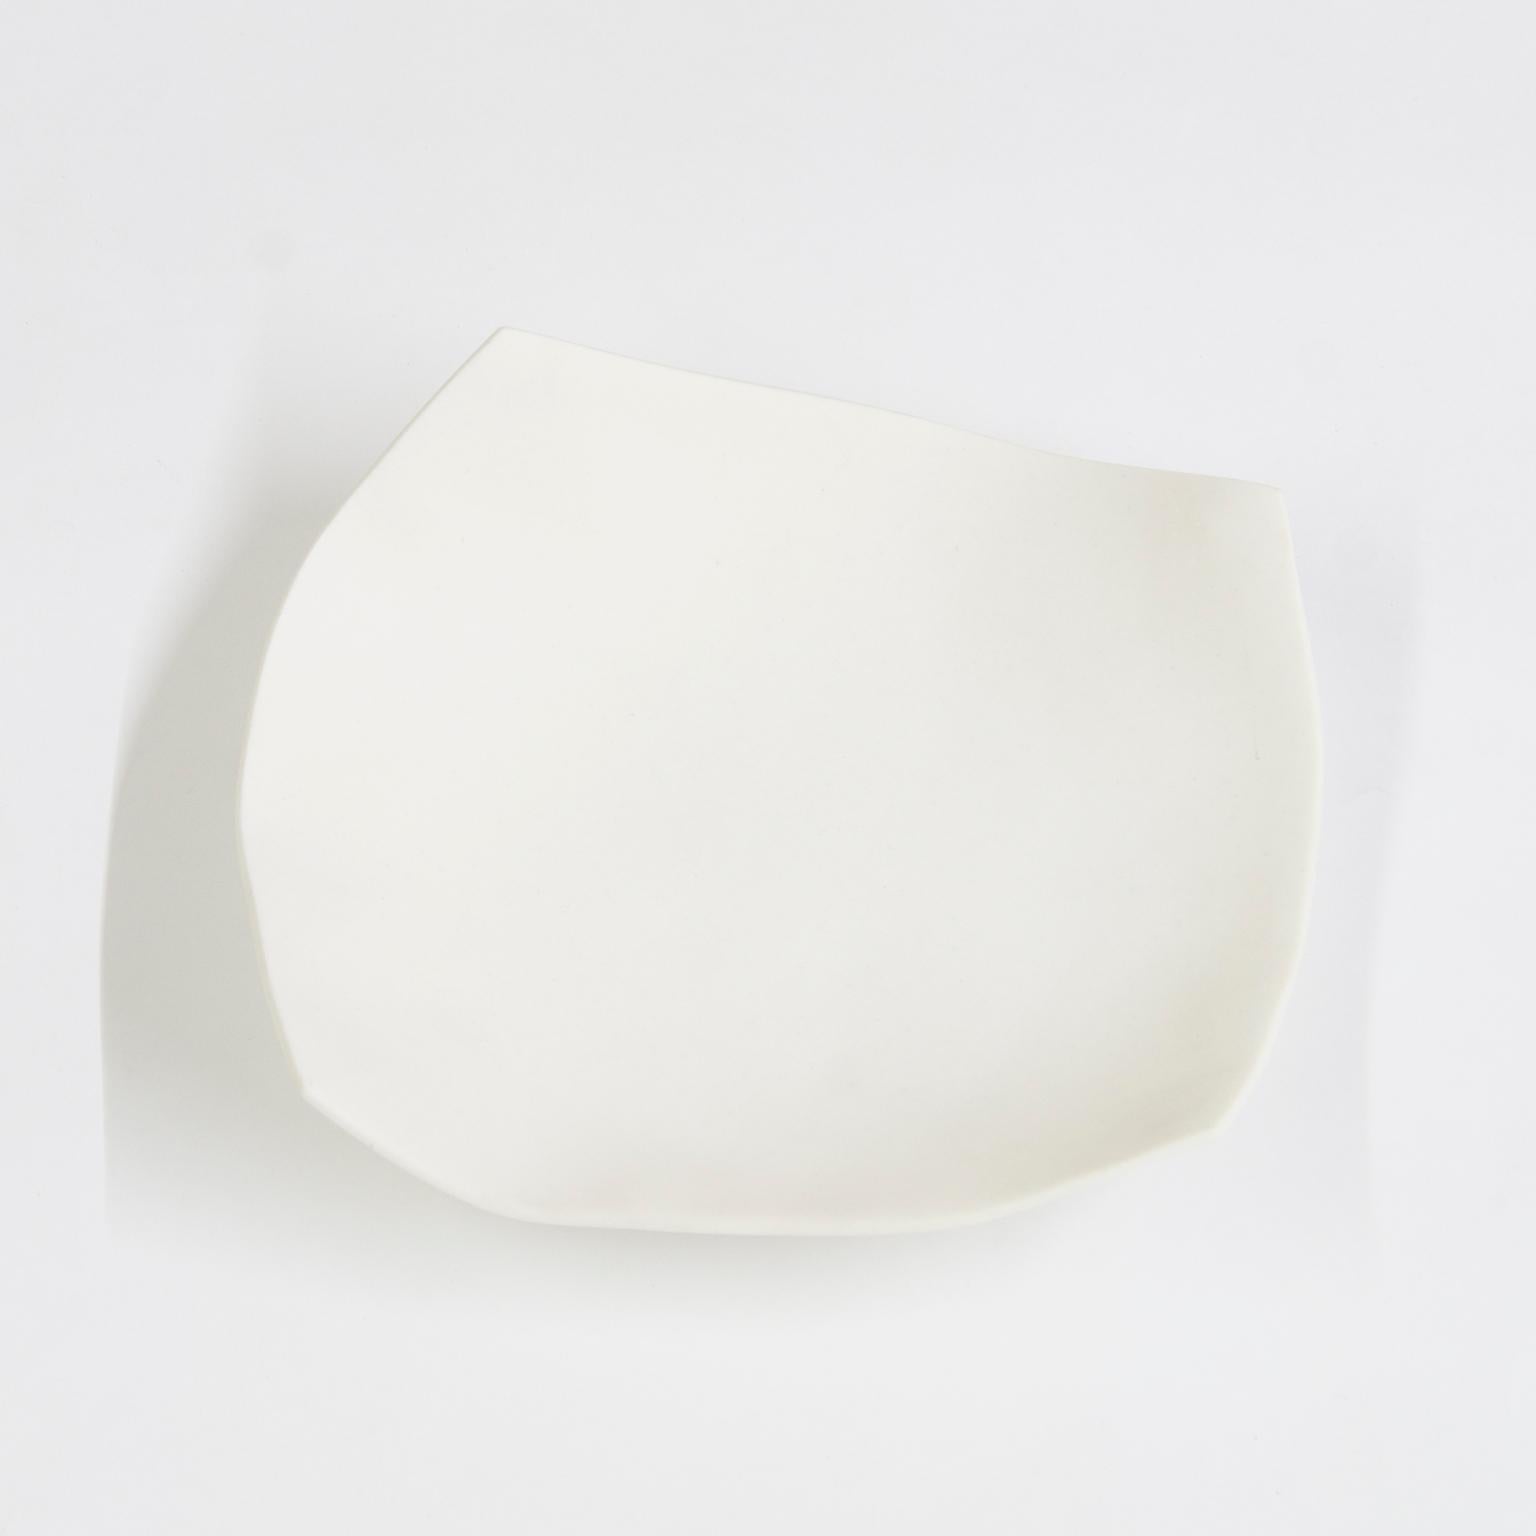 Each service plate is handcrafted by Mexican artisans. Slight variations in shape and size are to be expected and embraced as they add to the uniqueness of every plate. 

This porcelain service plate can be used for decoration or as a service plate.